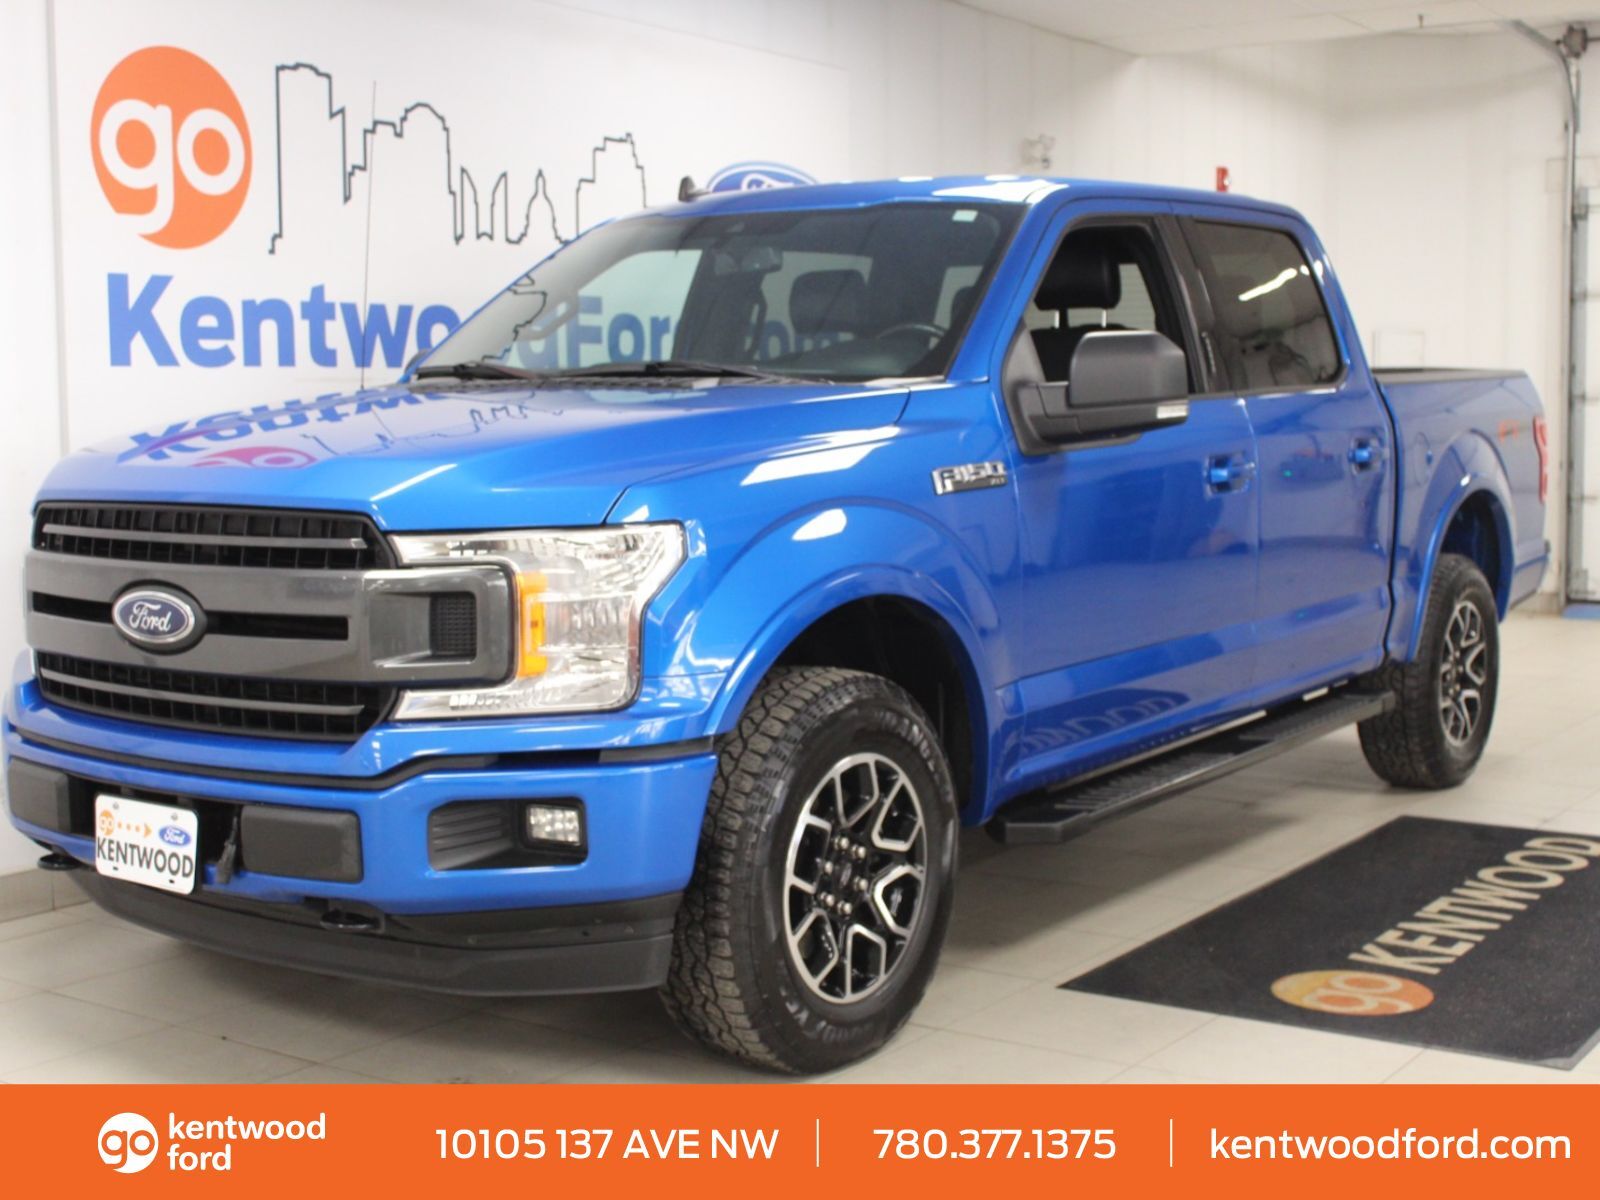 2020 Ford F-150 XLT | 302A | 4x4 | Trailer Tow | 18s | Sport | FX4